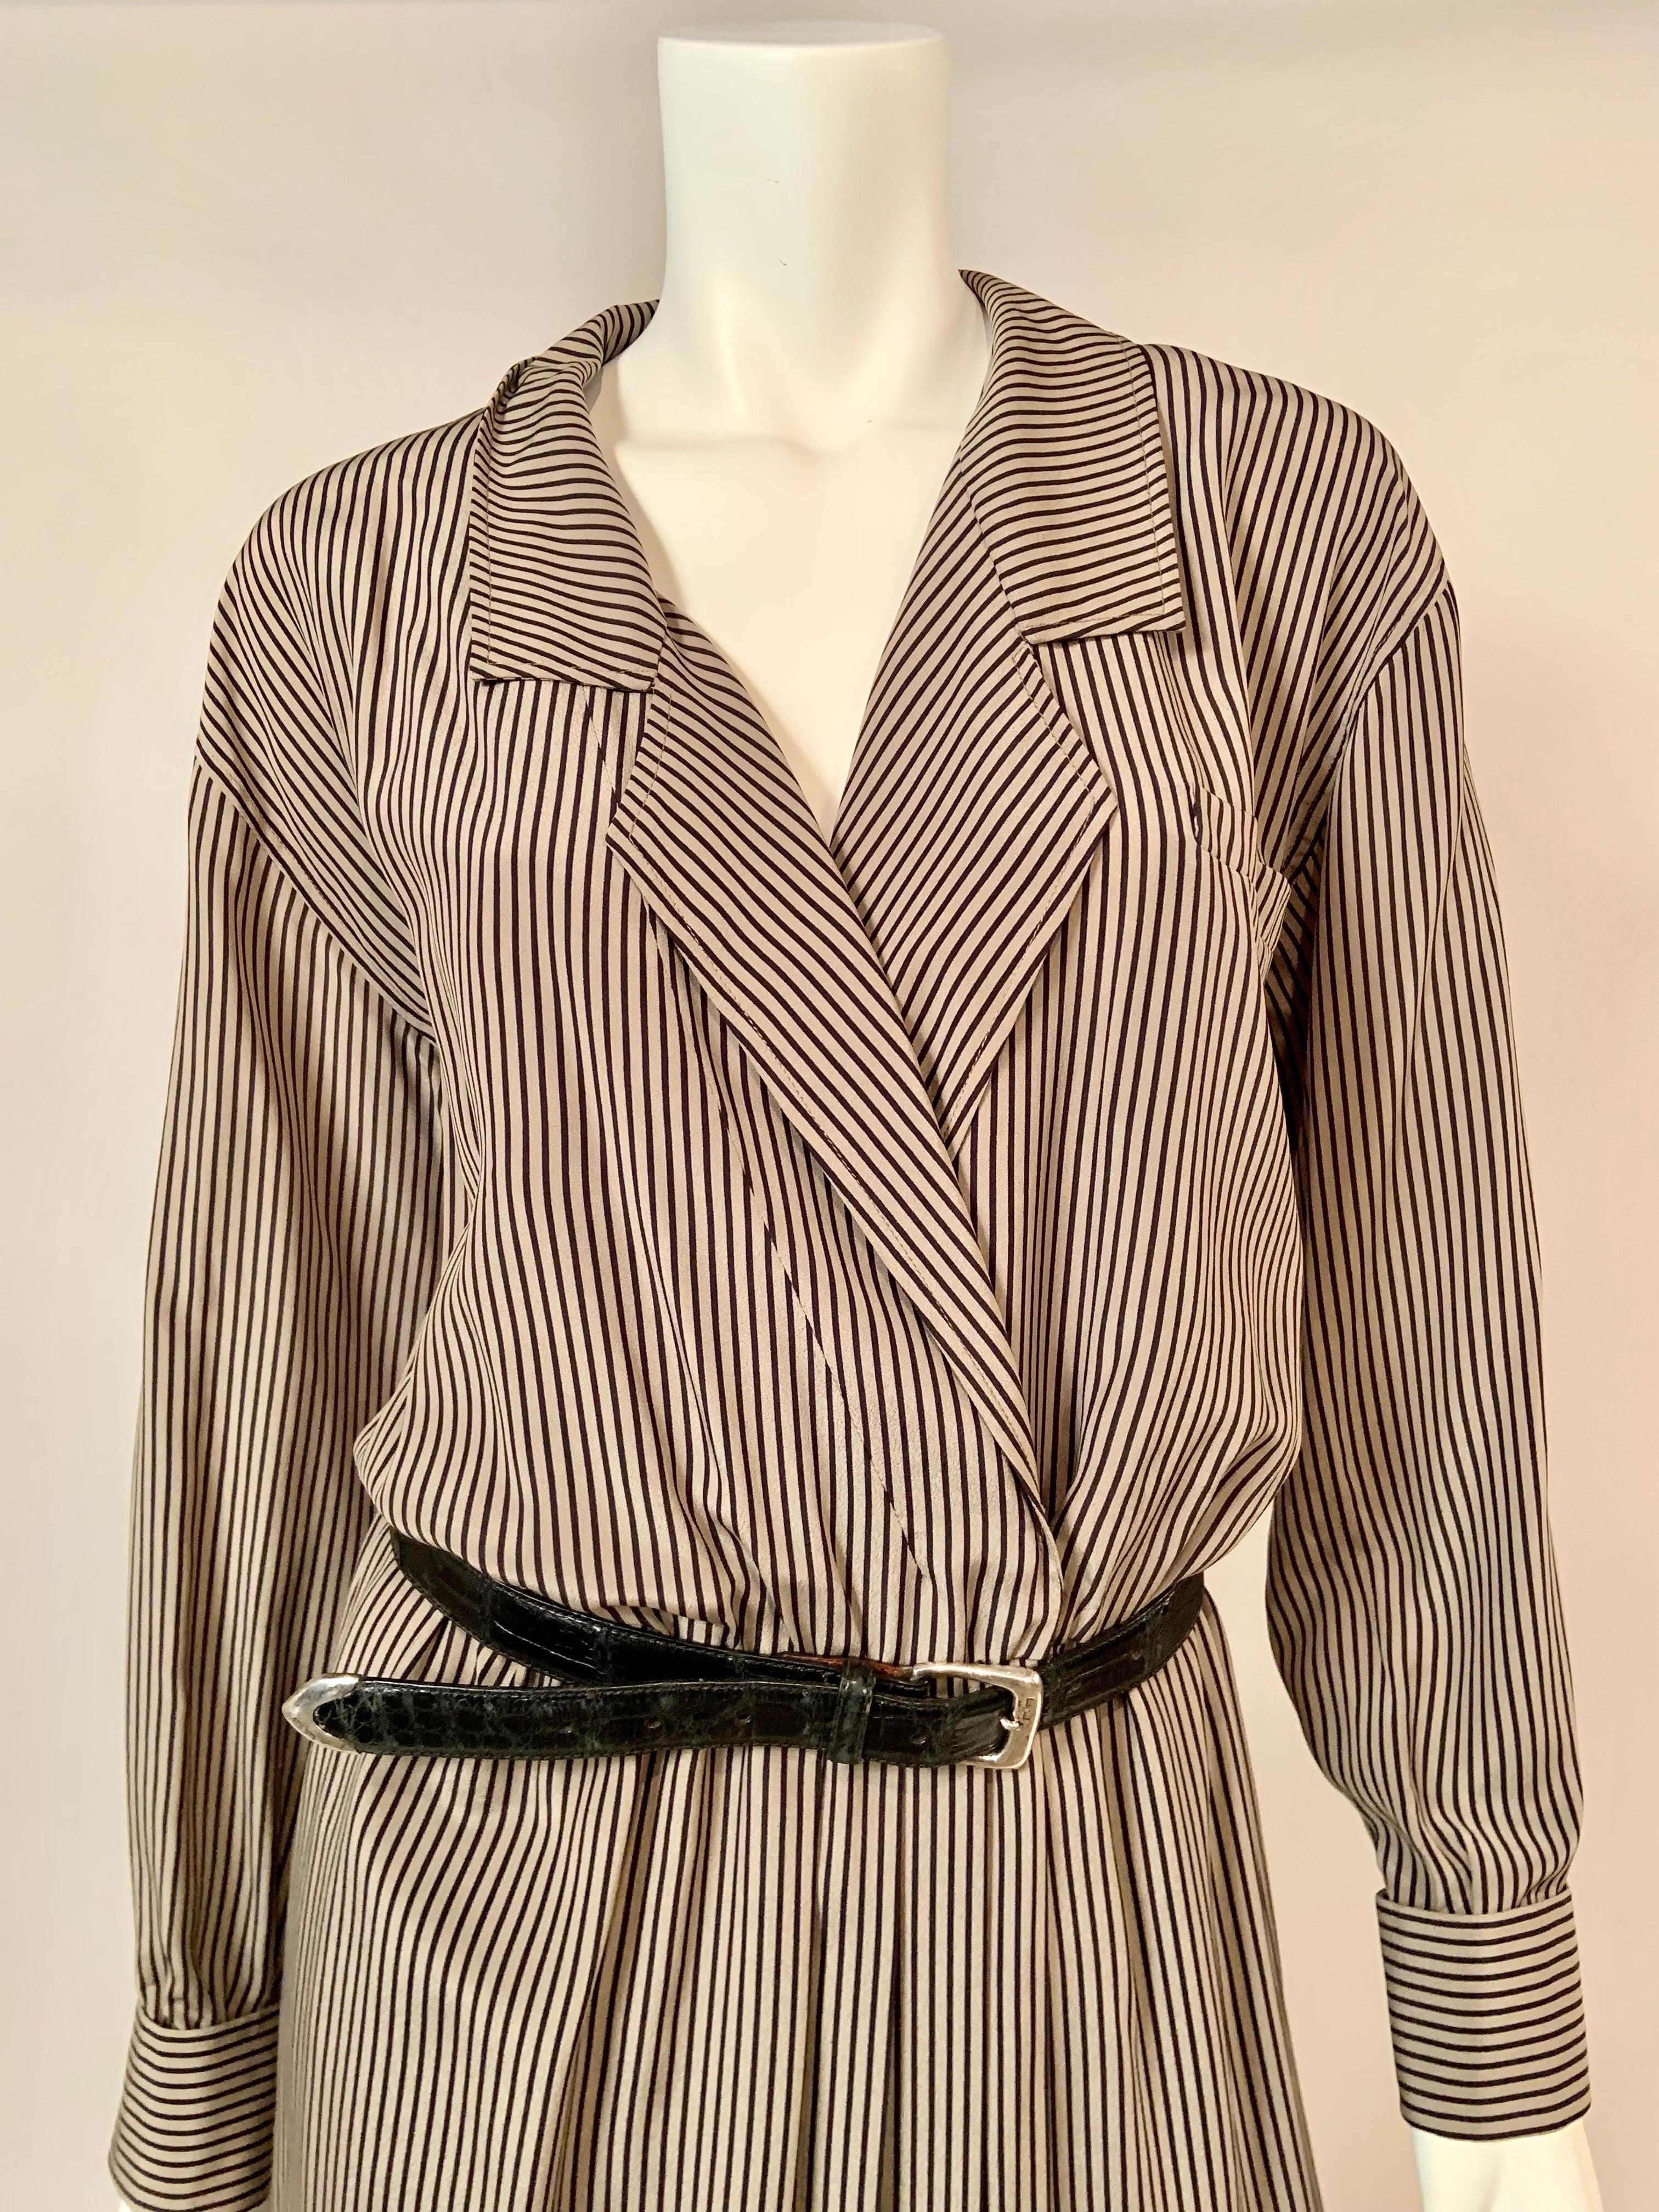 This striped silk dress from Salvatore Ferragamo is effortless dressing at the best level.
The dress has a peaked lapel, long sleeves with button cufflinks, an elasticized waist and a front opening with interior hooks at the waistline. The belt does